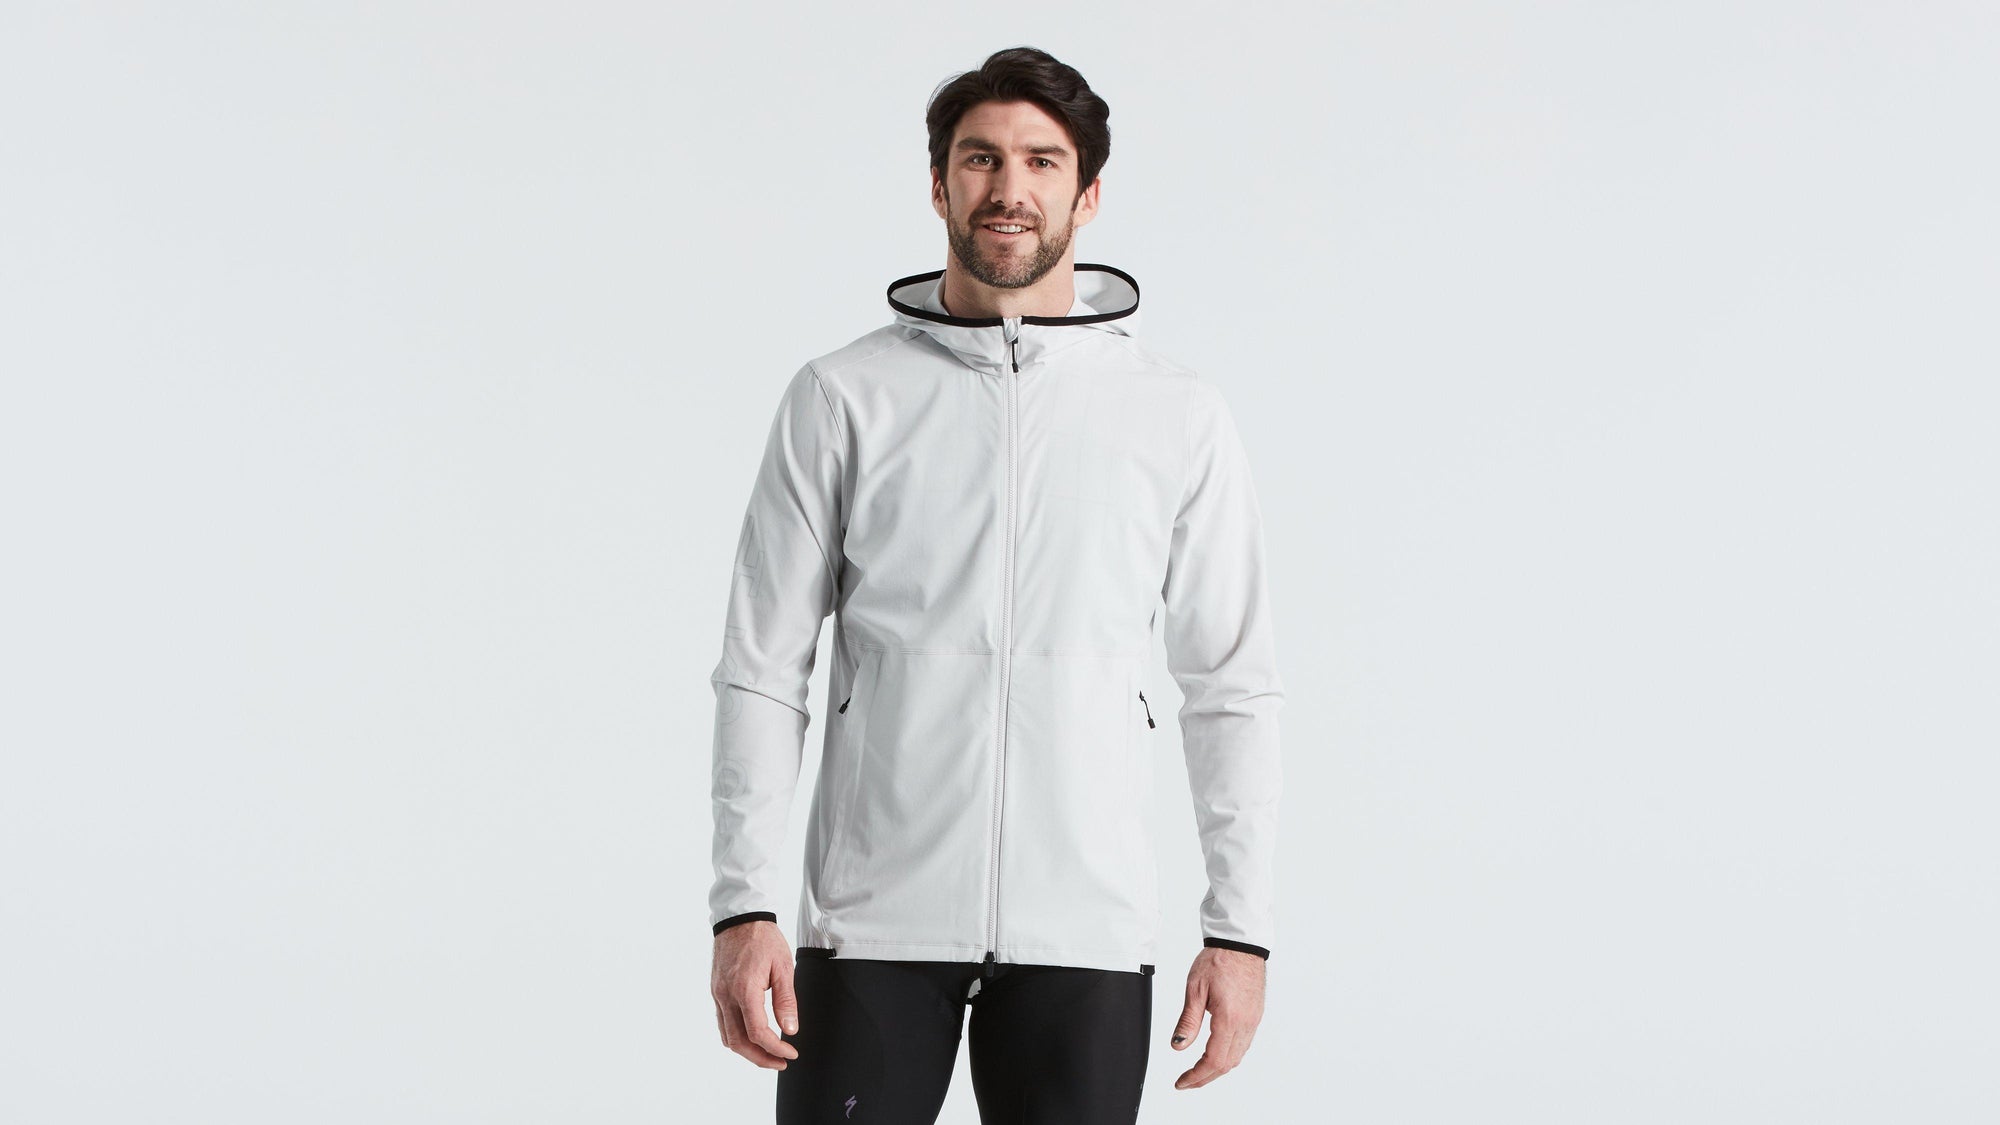 Men's Wind Jacket - Speed of Light Collection